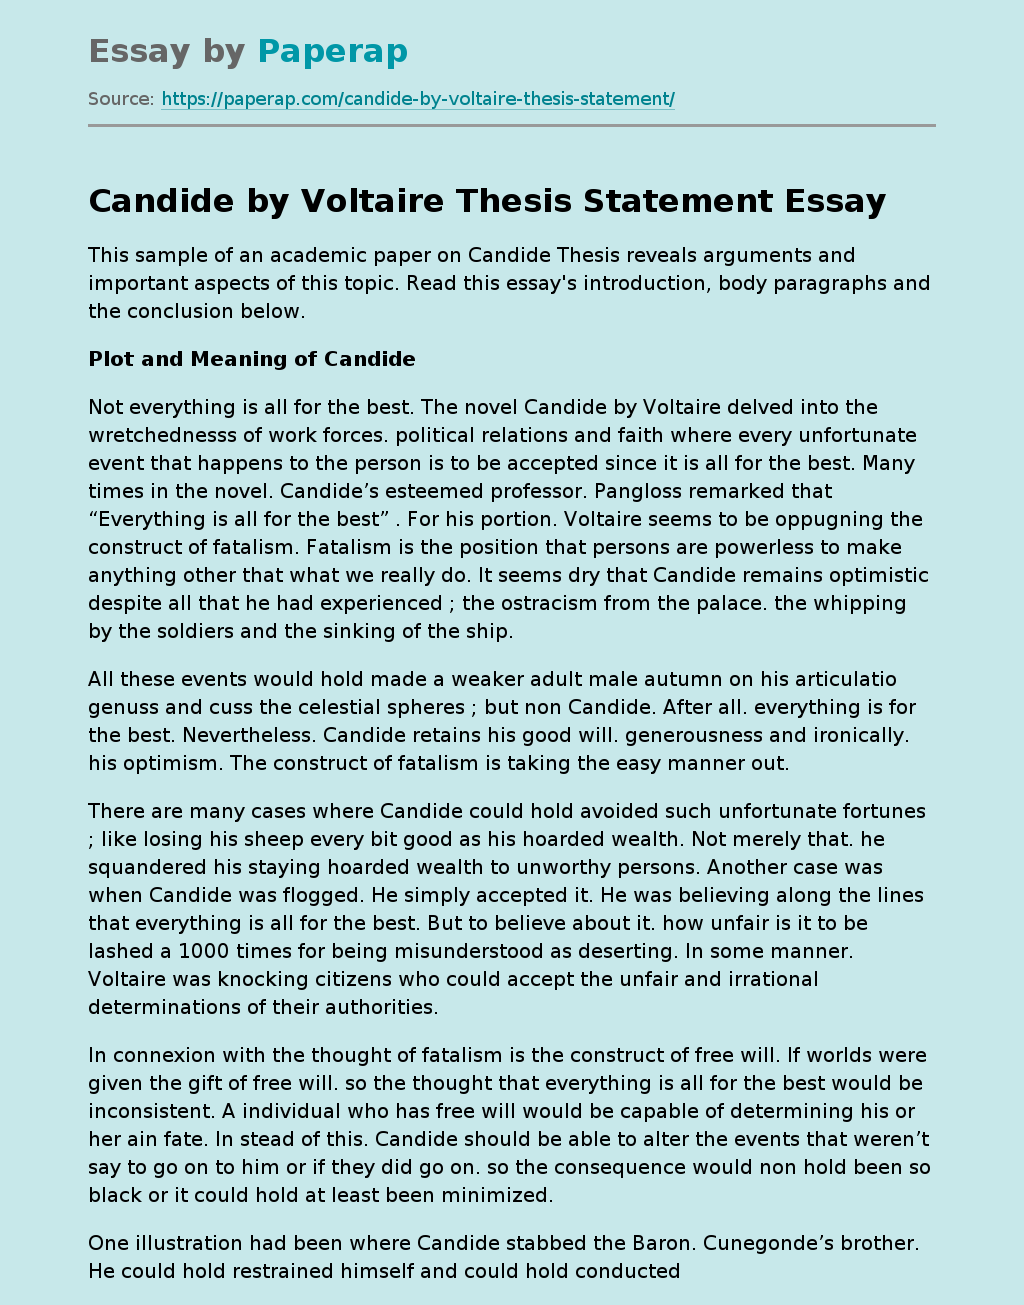 Candide by Voltaire Thesis Statement